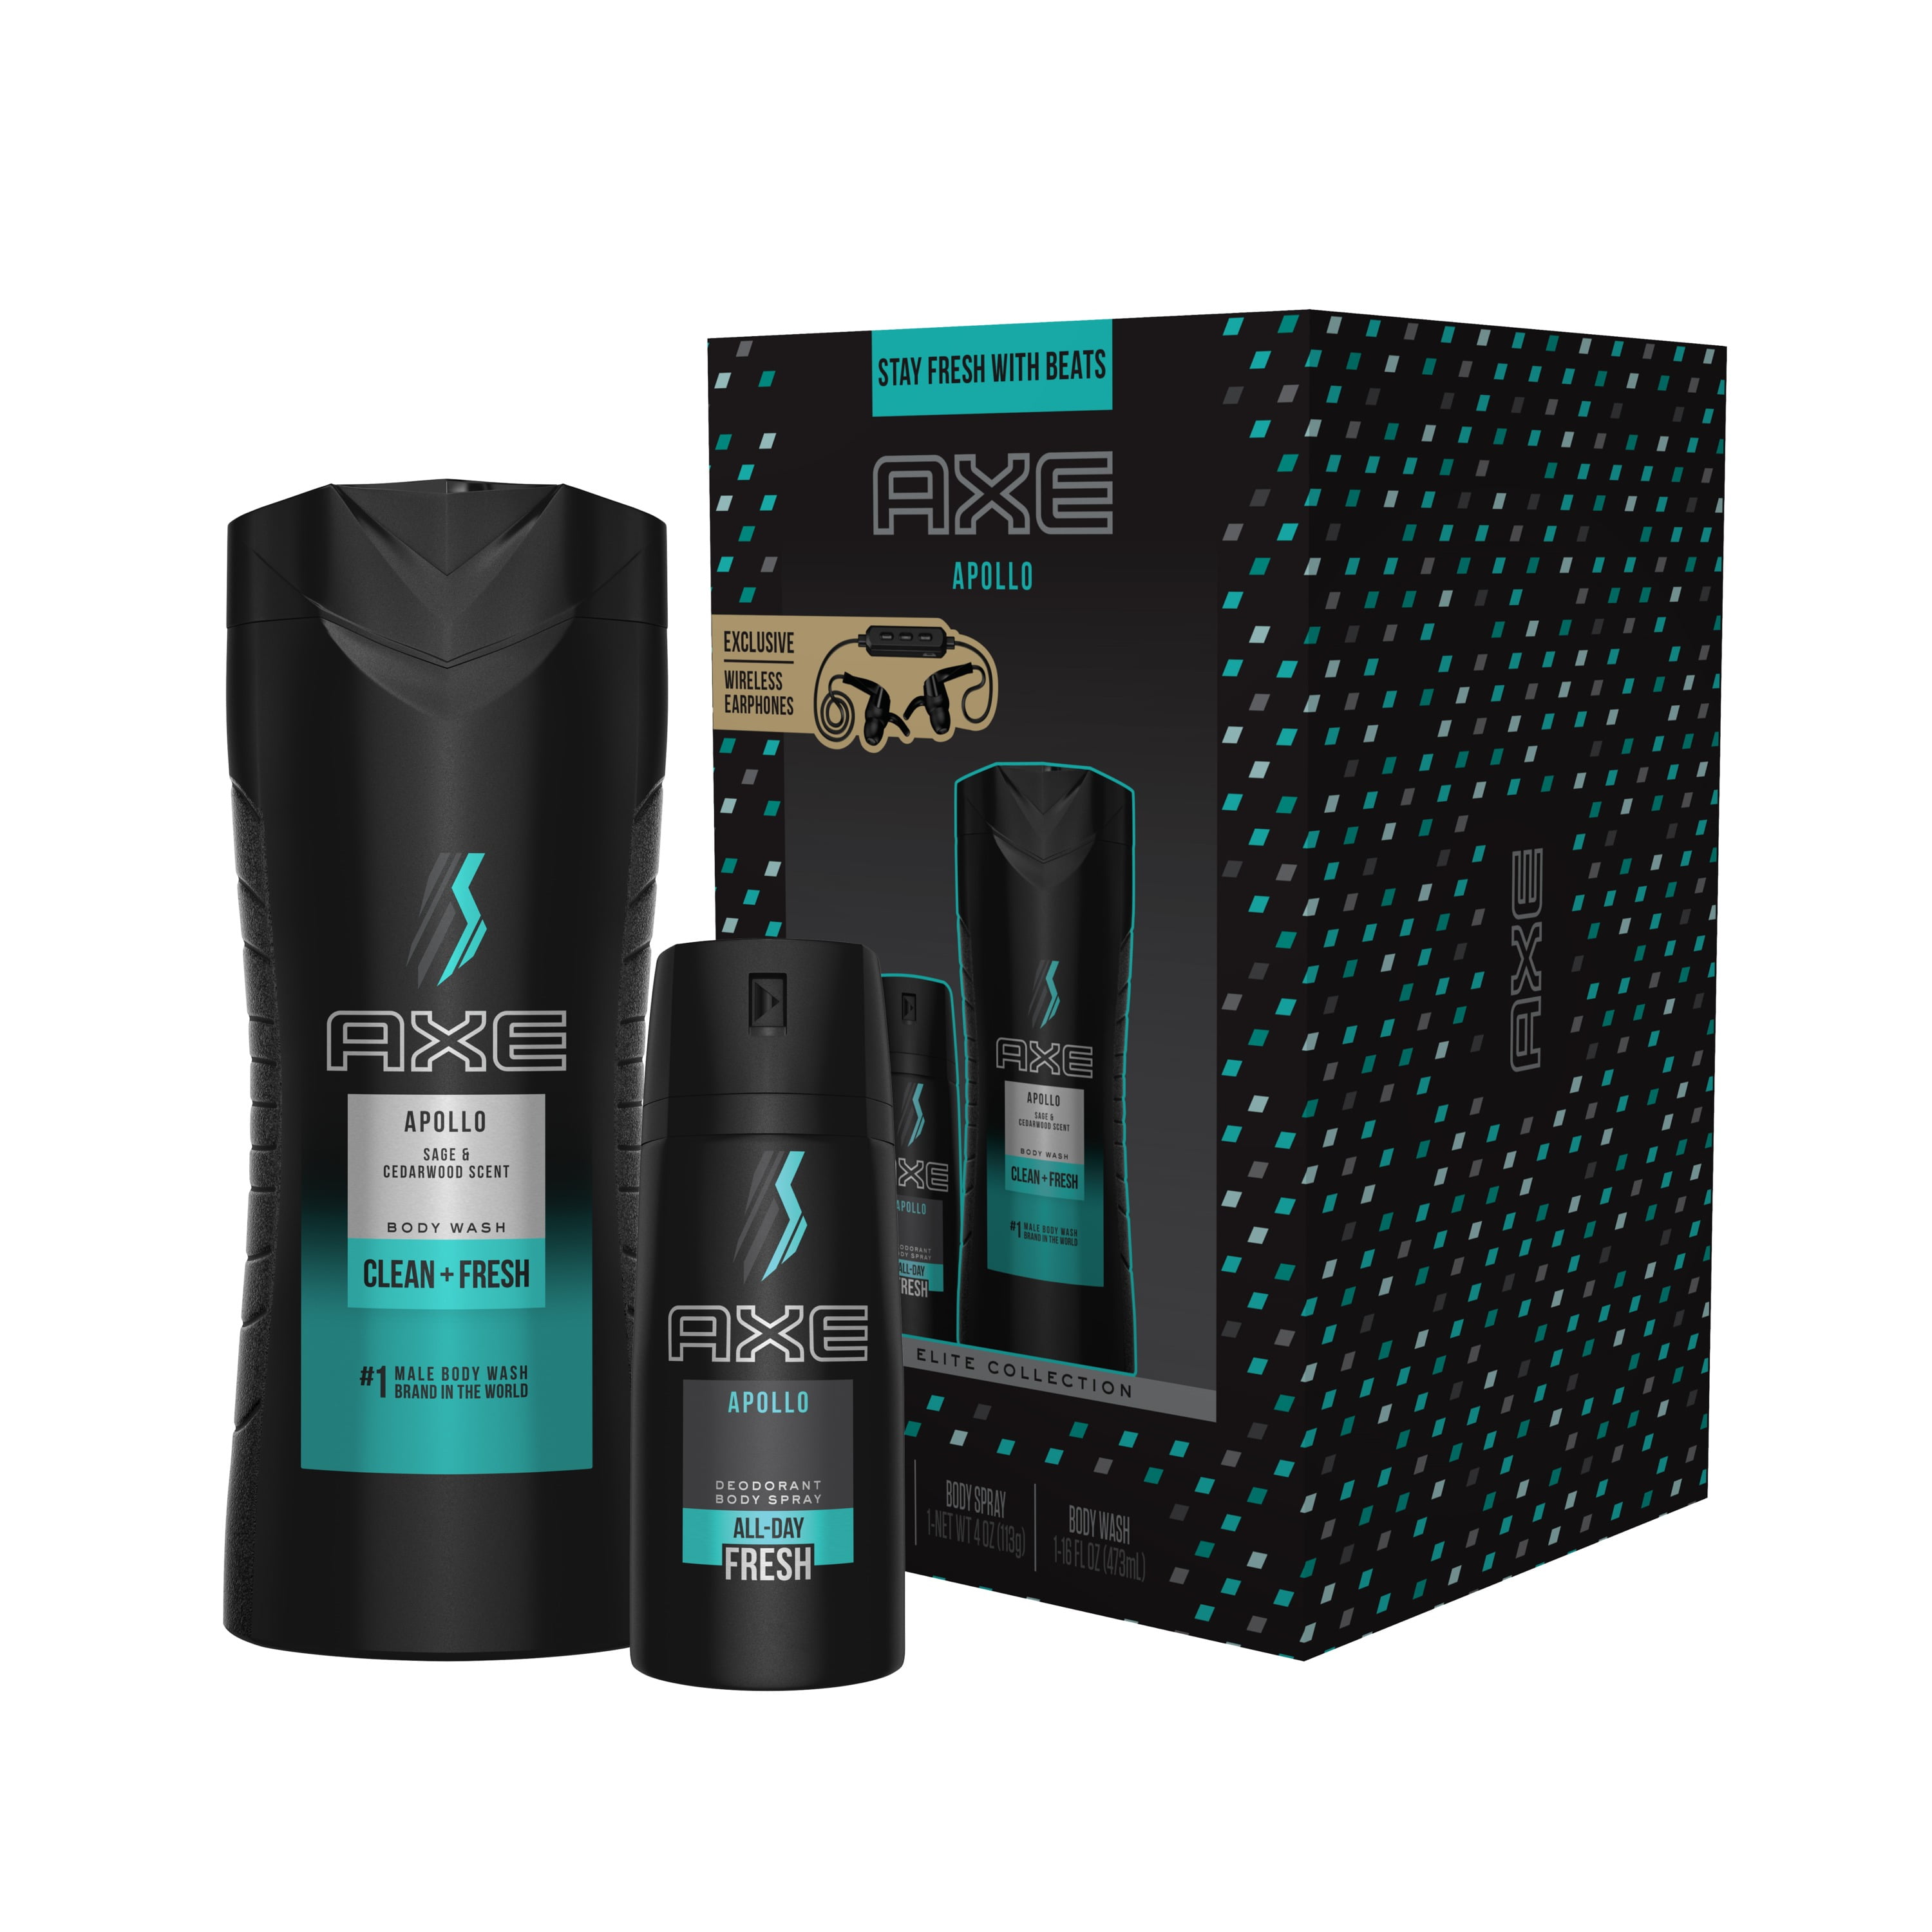 Axe gift sets on clearance